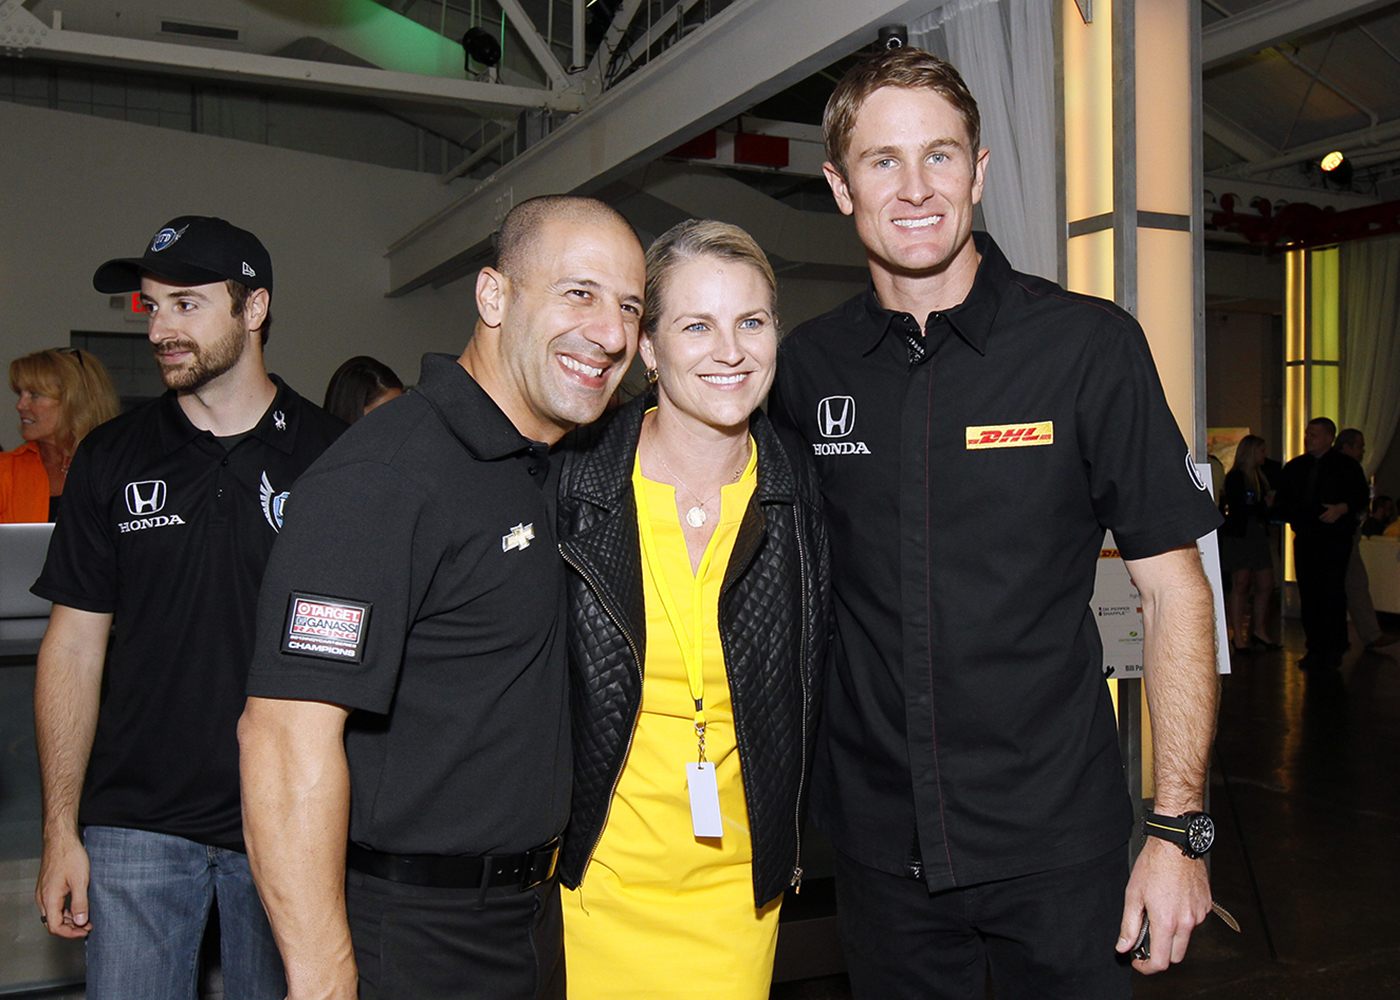 Enjoying the Yellow Party fundraiser for cancer before photographing 2013 Indy 500 Champion Tony Kanaan and 2014 Indy Champion Ryan Hunter-Reay behind the scenes at the Indy 500 May 25, 2014